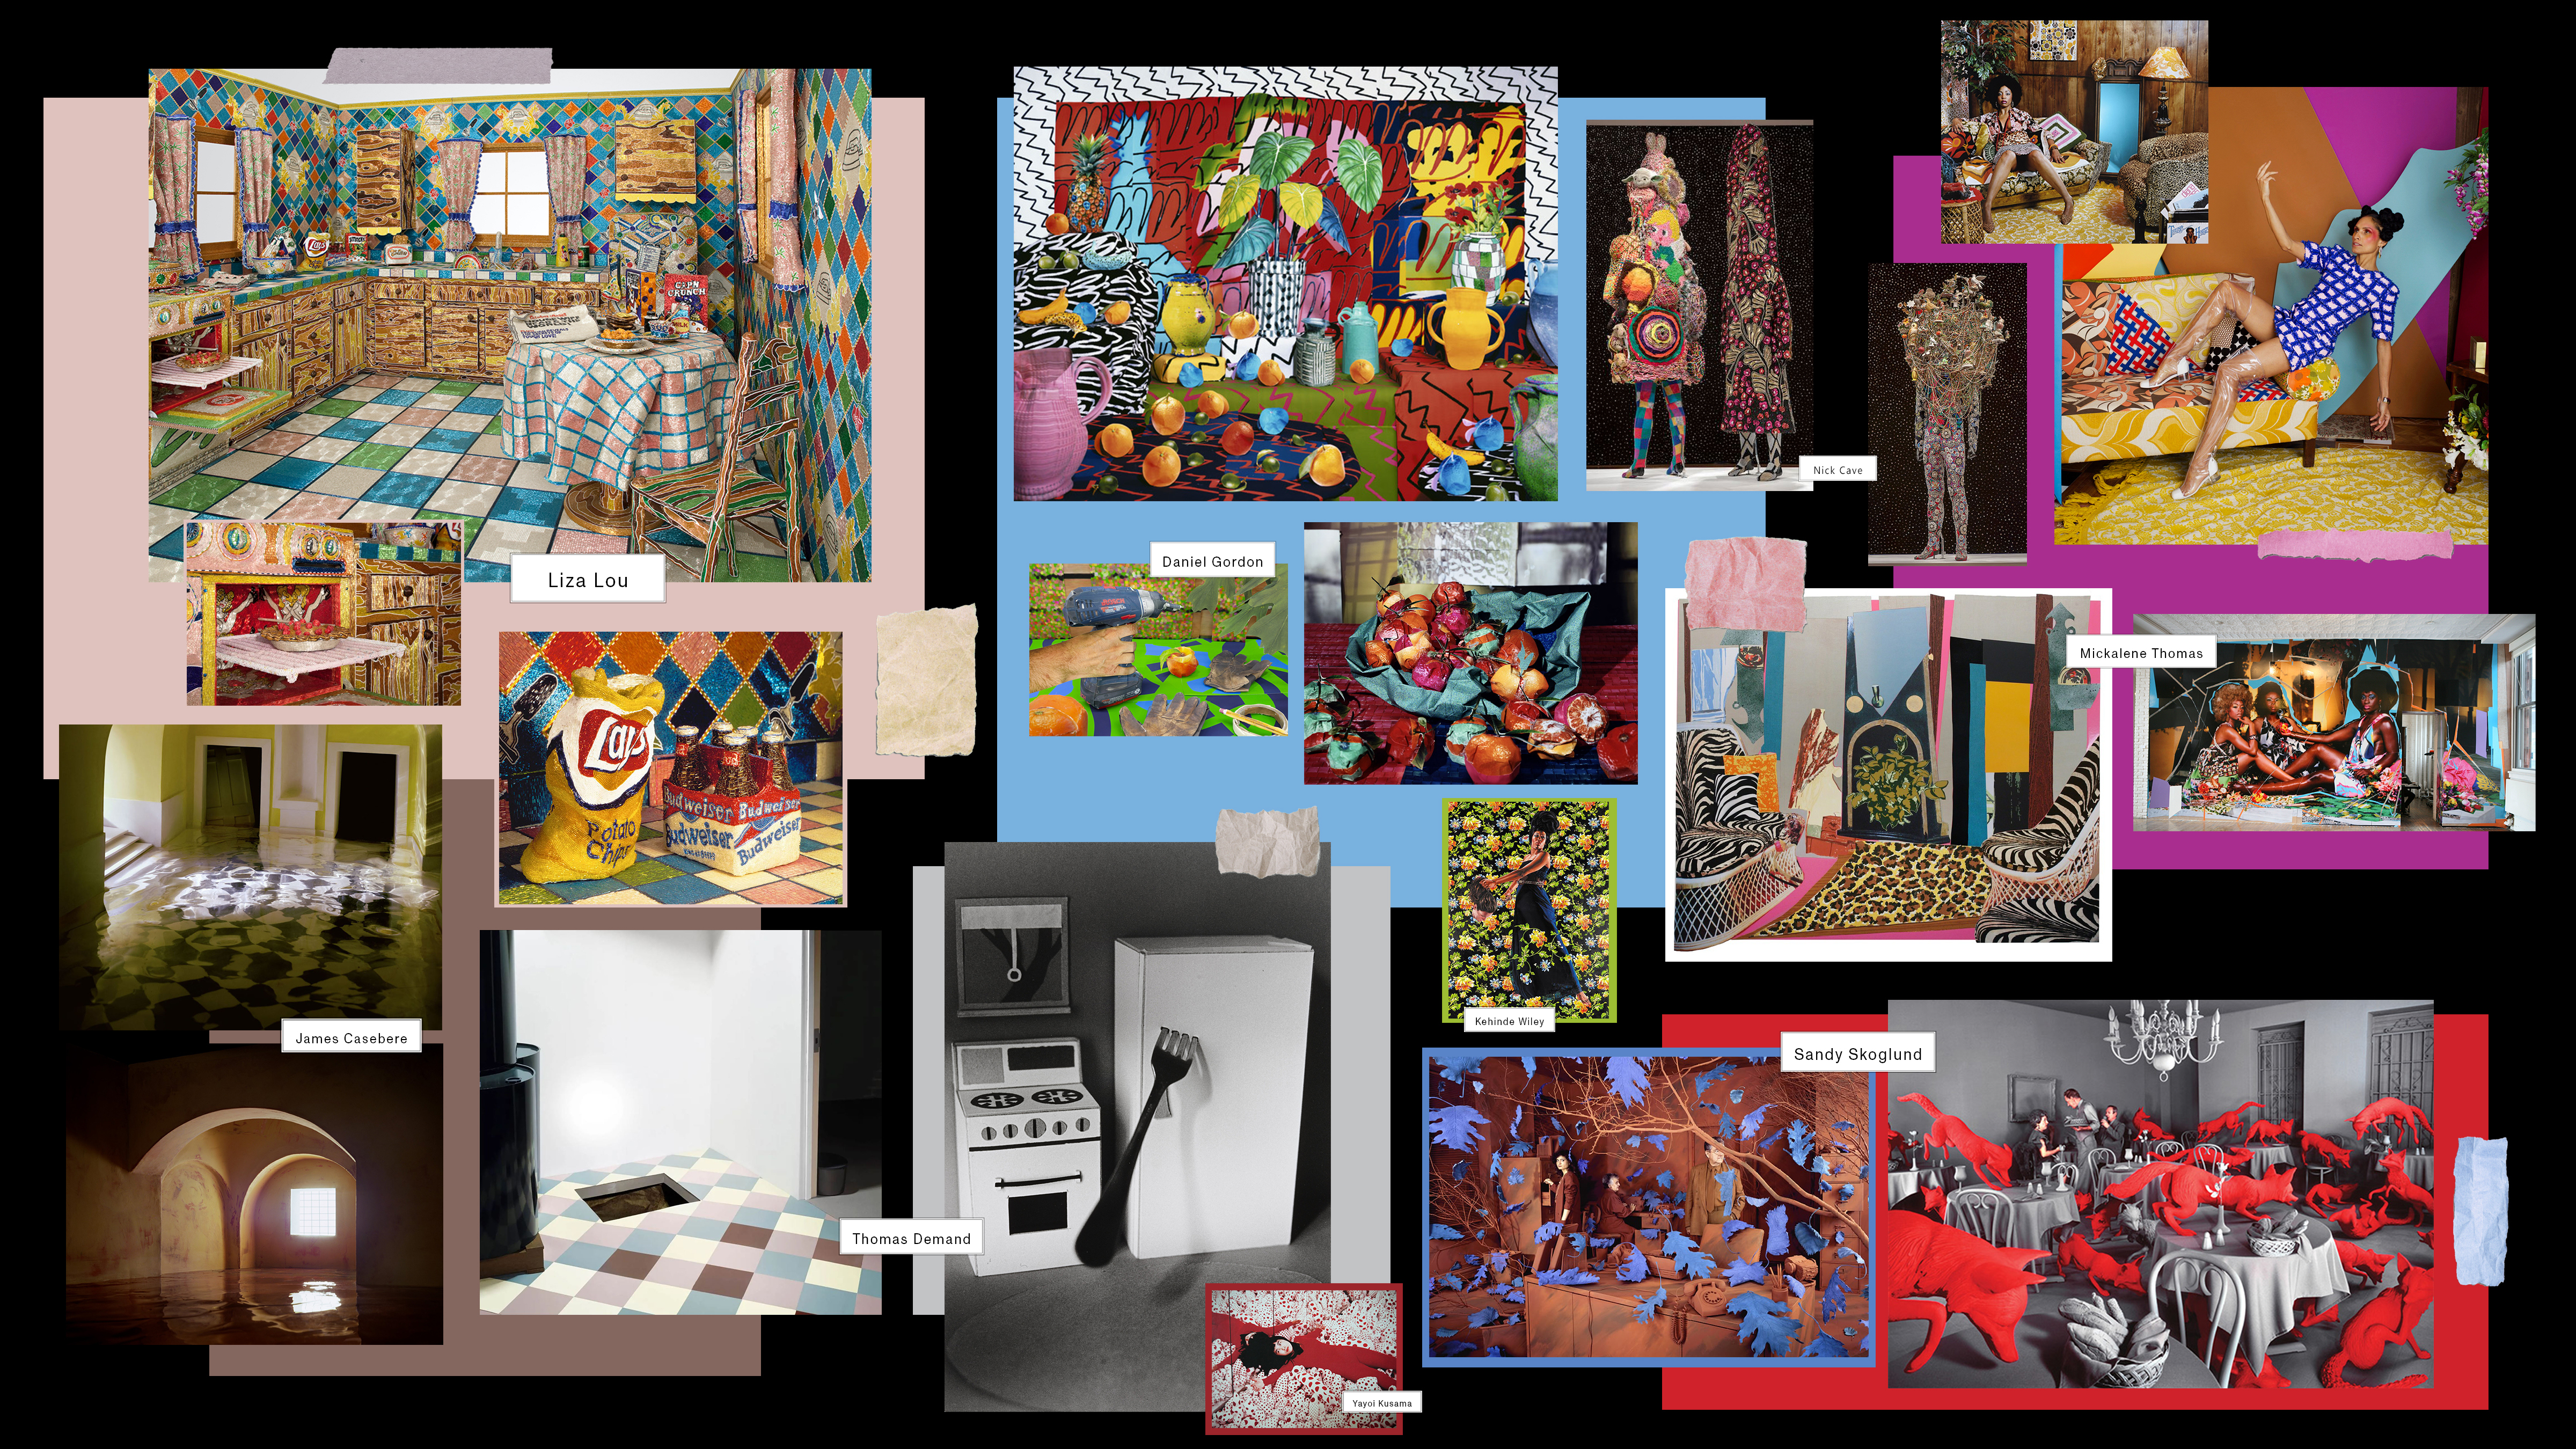 A digital collage of works from the artists cited above. Against a black background are a number of colorful images including a kitchen scene, hallways, still life's, a dining room, living rooms, and costumed people. 